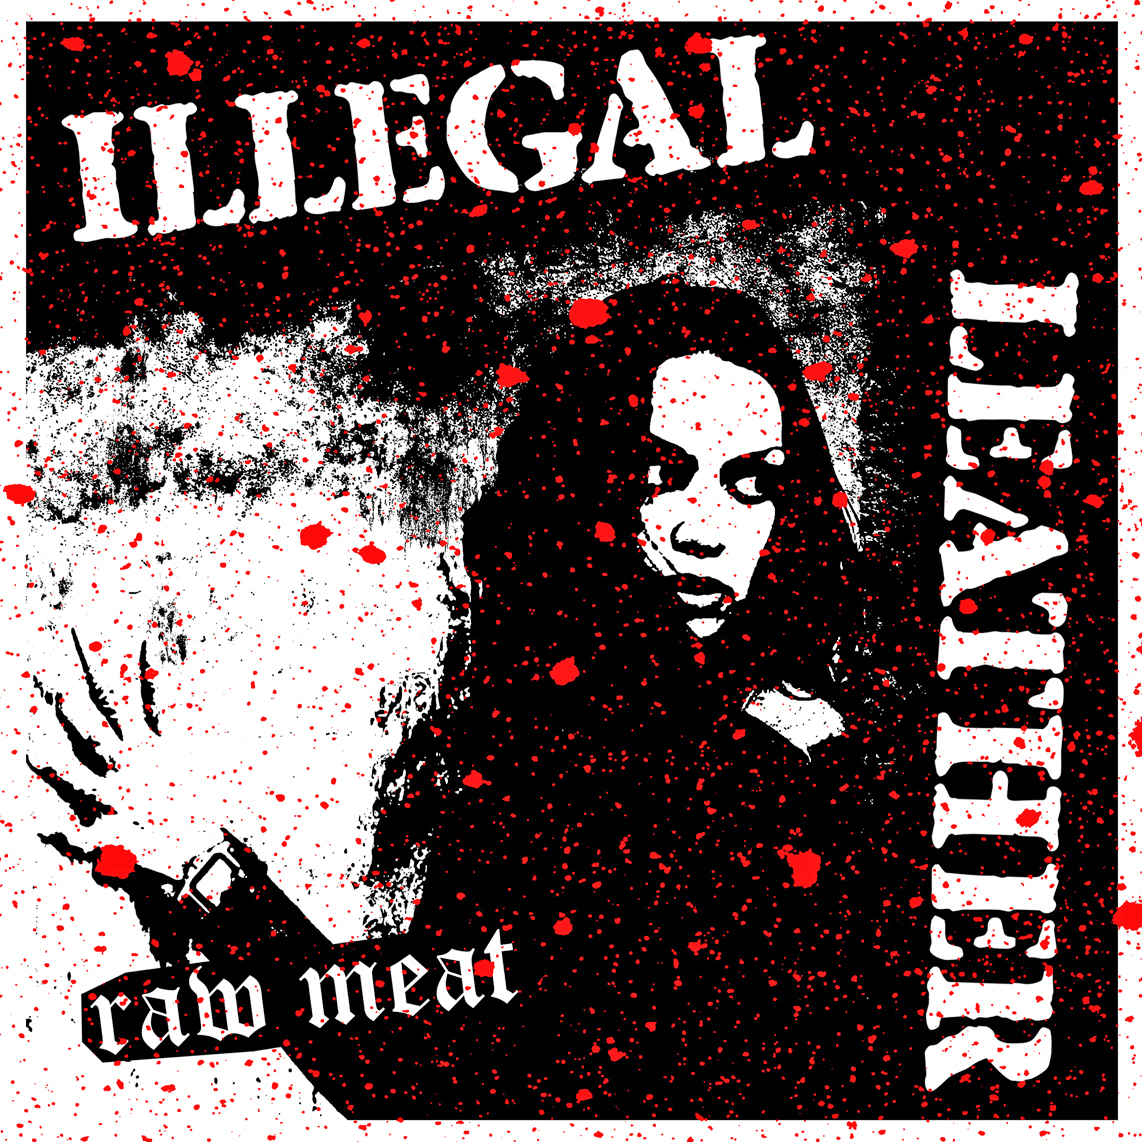 Illegal Leather- Raw Meat LP ~RARE COVER #3 OF 4-COVER QUADRILOGY LTD TO 35 HAND NUMBERED COPIES W/ CUSTOM BLOOD RED SPLATTERS!